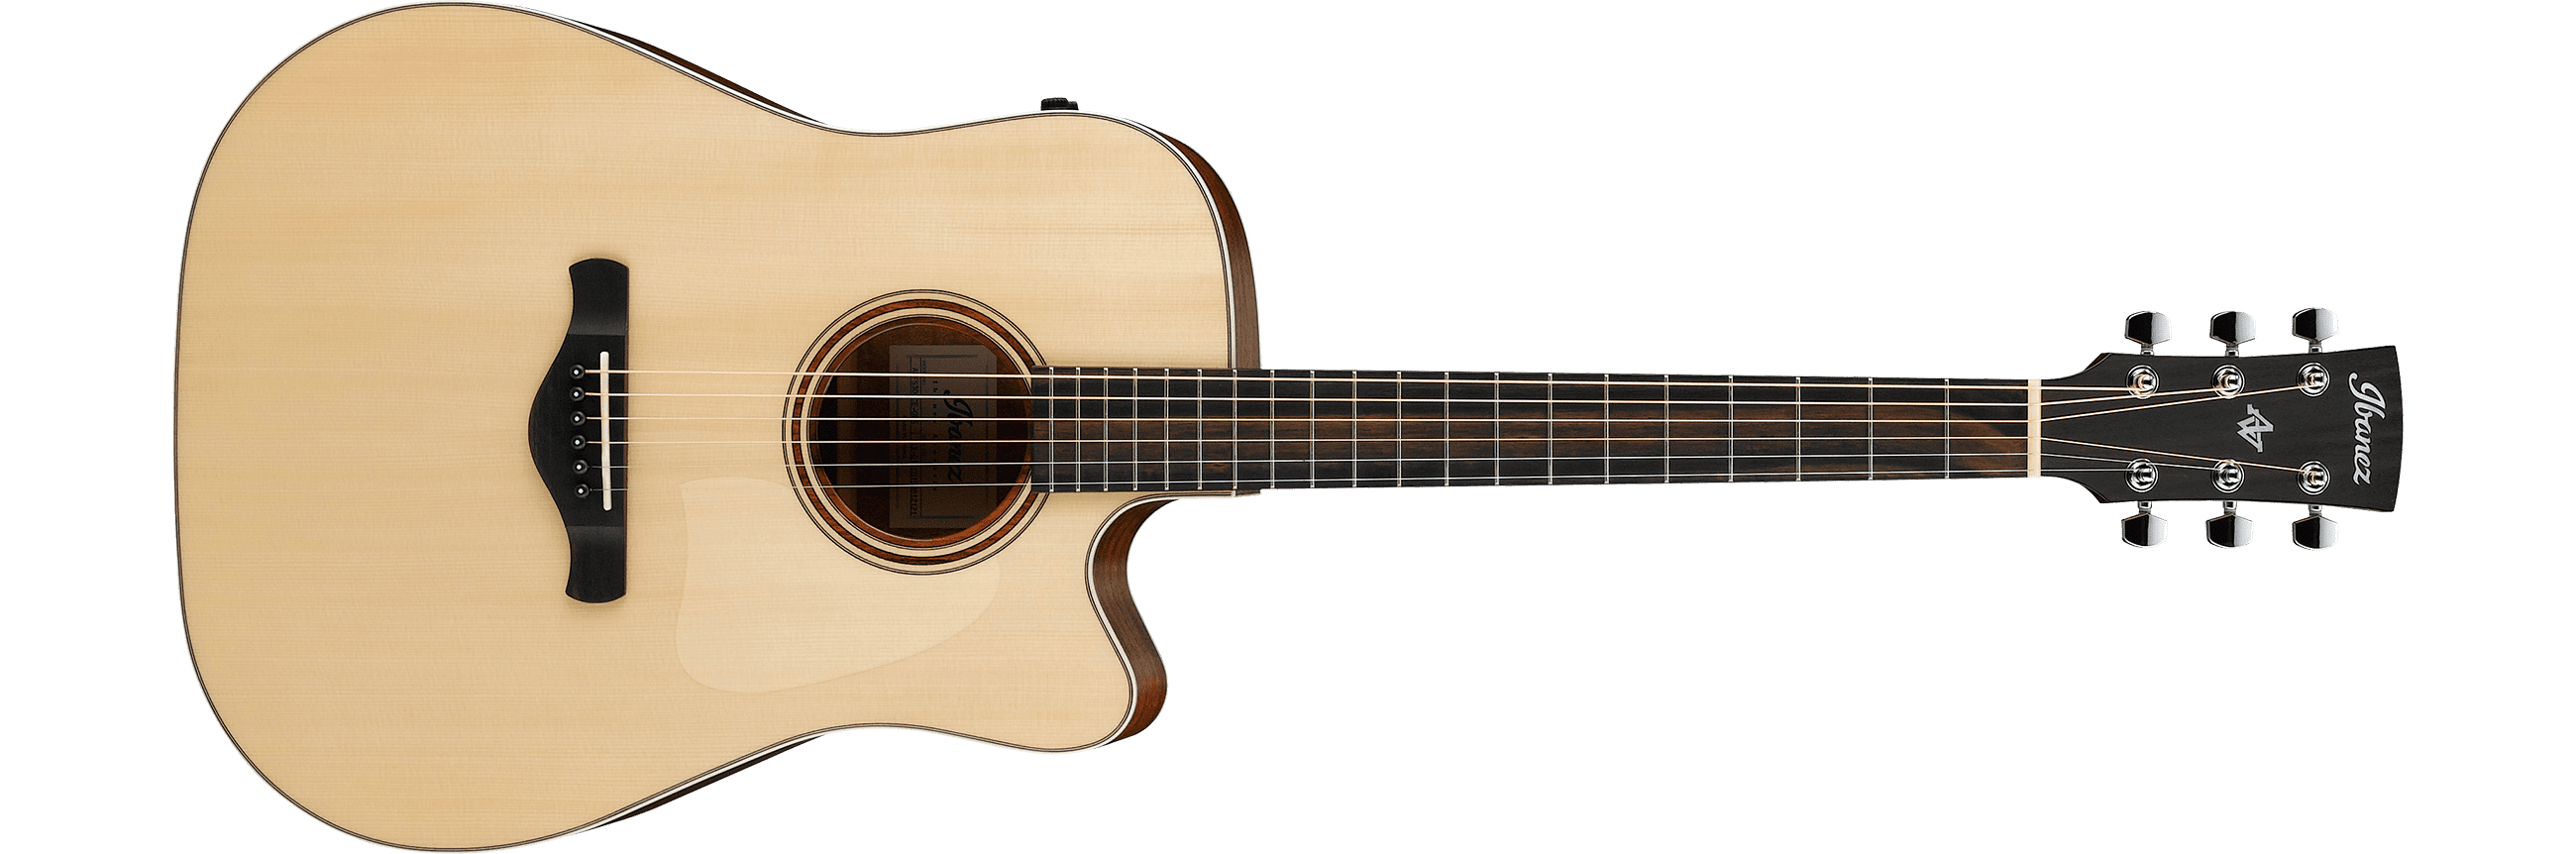 AWFS300CE | ARTWOOD | ACOUSTIC GUITARS | PRODUCTS | Ibanez guitars